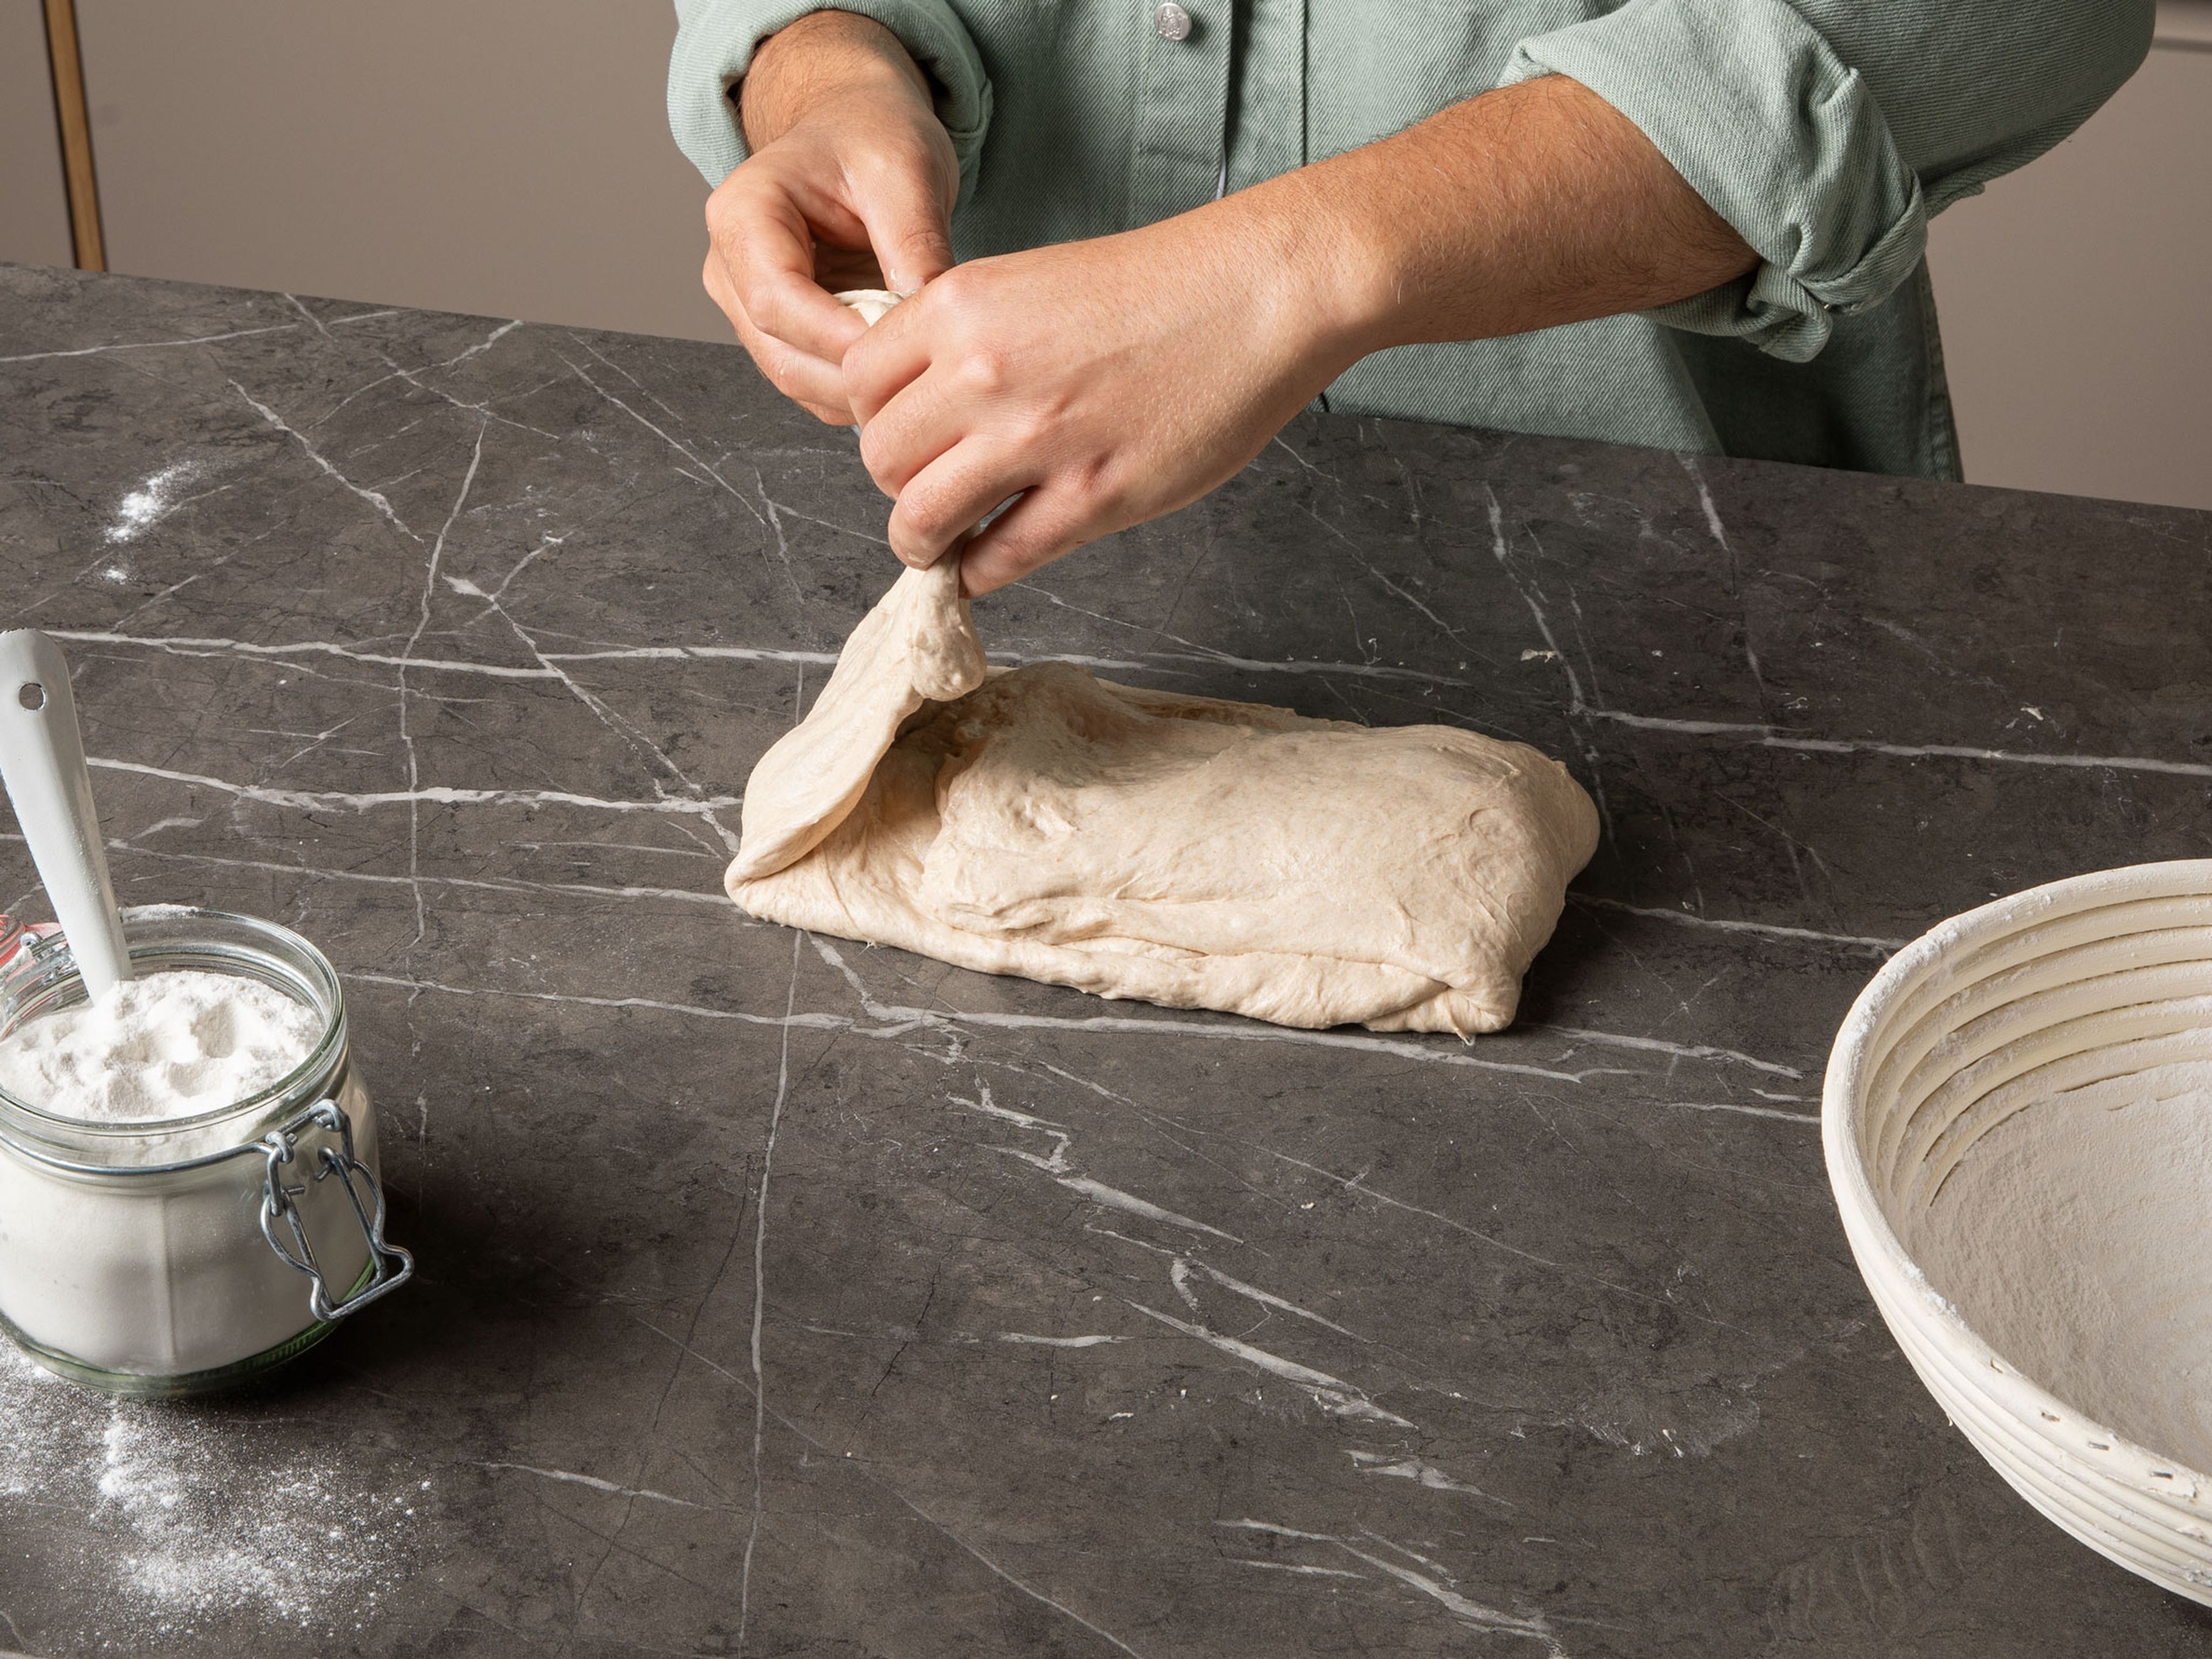 Perform a final stretch and fold (“lamination fold”). Use wet hands to transfer the dough to a lightly wet surface, flatten the dough with your hands and gently stretch it out into a thin circle by pulling continuously around the circumference of the dough. Fold the dough for its final shape by grabbing it from the end closest to you, pull it towards you and fold it into the middle, then fold the opposite end over it. Do the same with the other sides. Grab each corner and gently stretch them into the middle. Flip the dough over so the seam-side is on the counter and begin building tension on the surface of the dough by pulling it towards you in a circular motion. Do this a few times until the dough has a tight surface, wet your hands whenever necessary. For the longer bulk fermentation, transfer the dough back to the bowl, cover it with a damp kitchen towel and let it rise until doubled in size, approx. 4-12 hrs. The amount of time it takes depends on how active your starter was as well as your environment (alternatively, let the dough rise for 1 hr. and then pop it in the fridge and finish the process the following day).